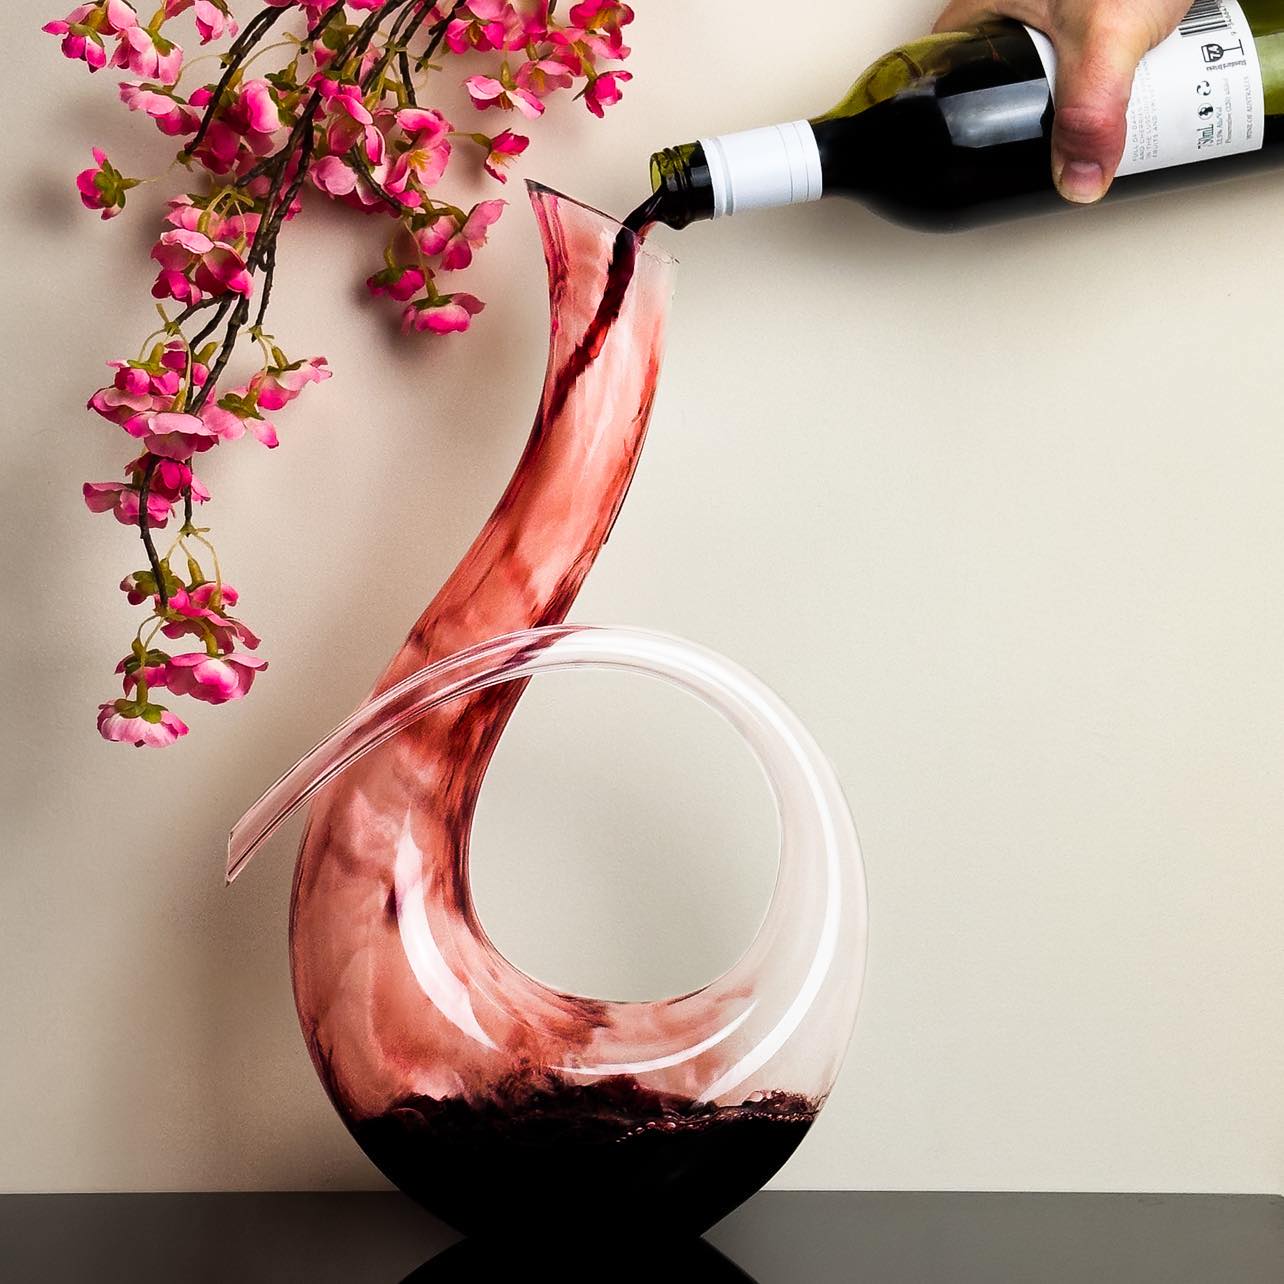 The Airlie Wine Decanter Hand Blown Glass